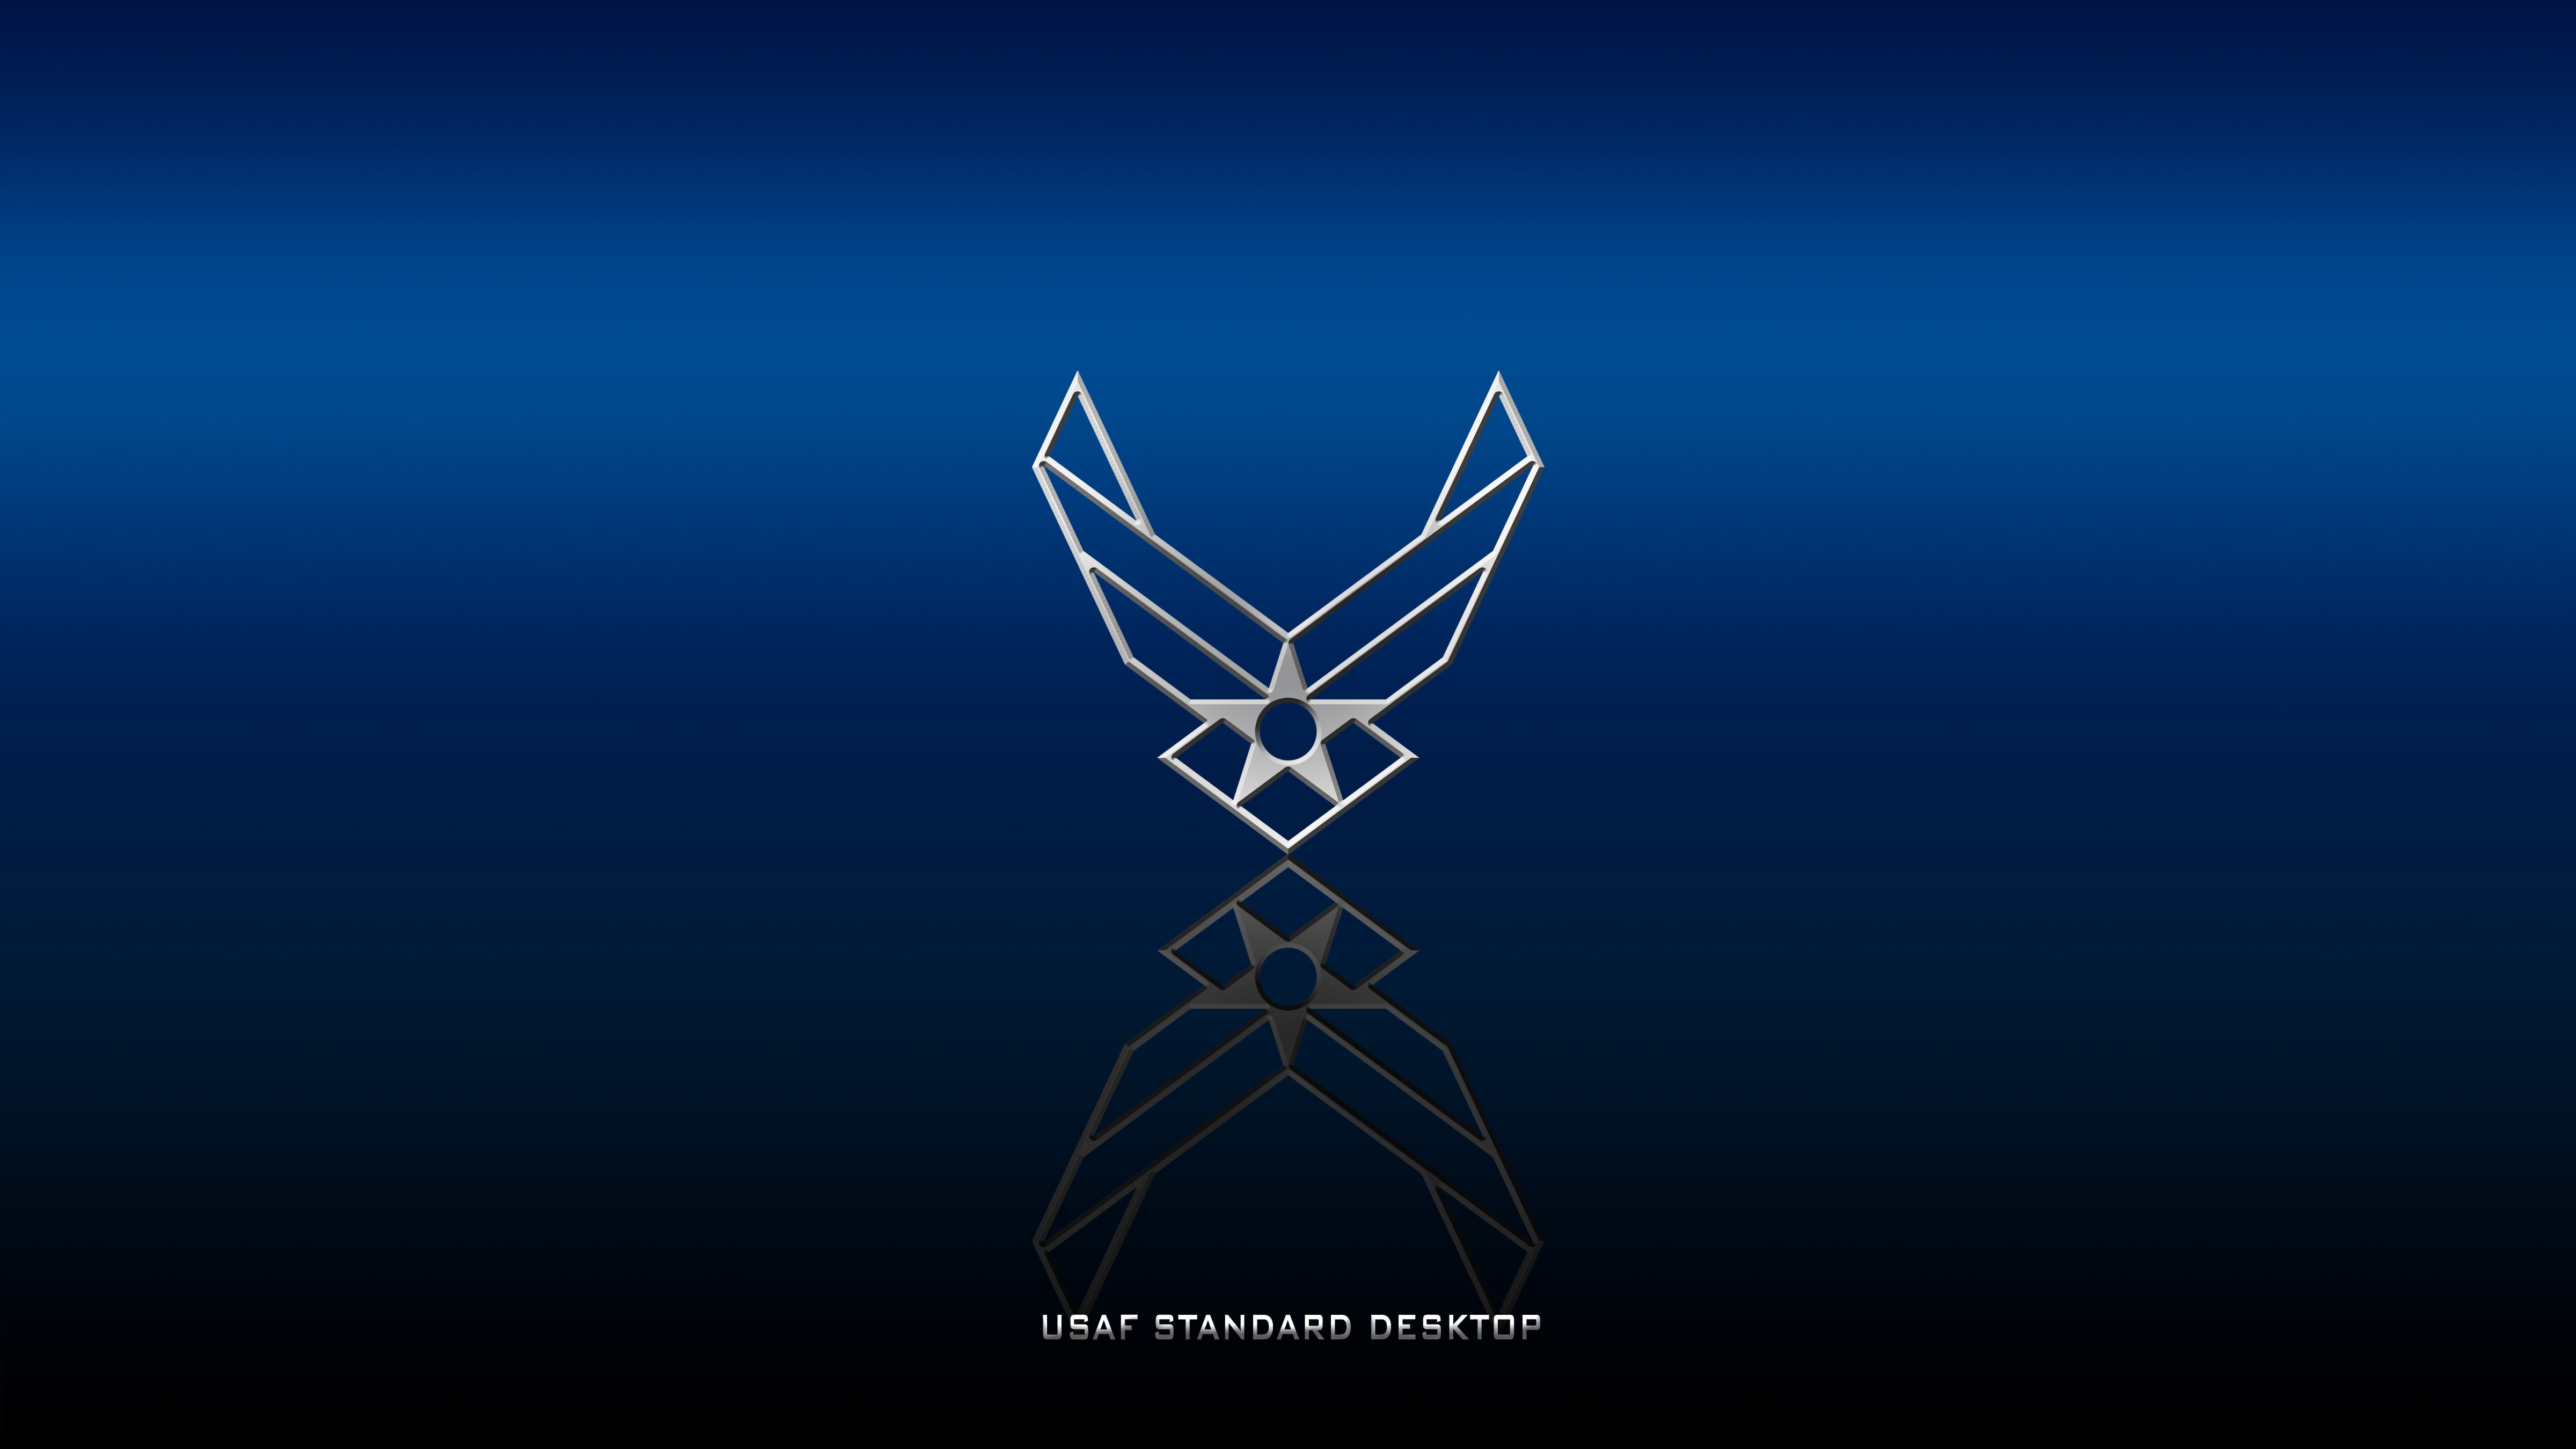 US Air Force, military, cyberspace